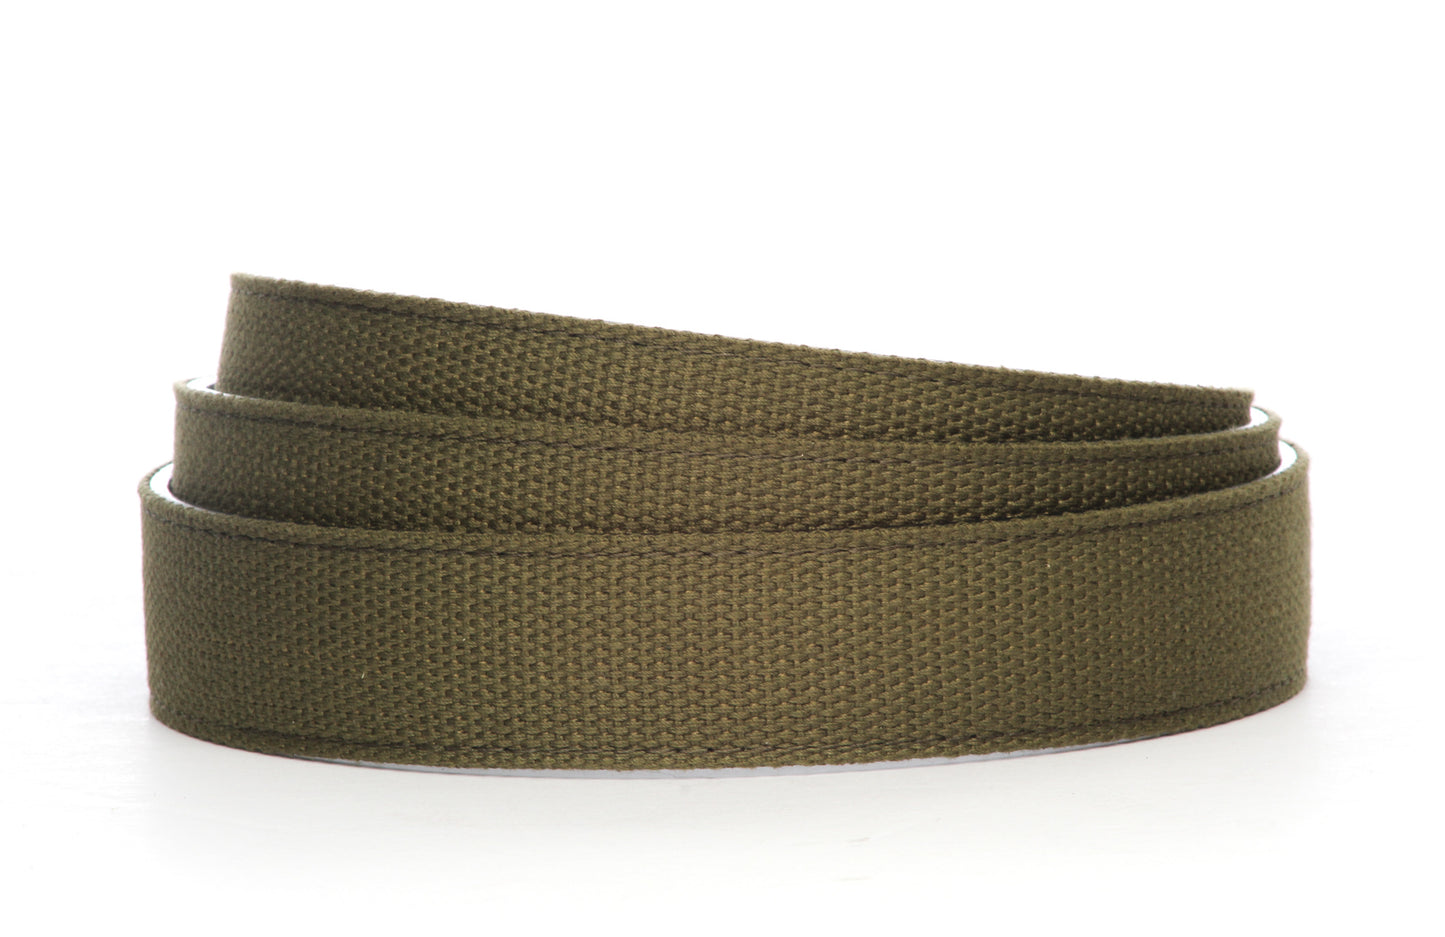 Men's canvas belt strap in olive drab with a 1.25-inch width, casual look